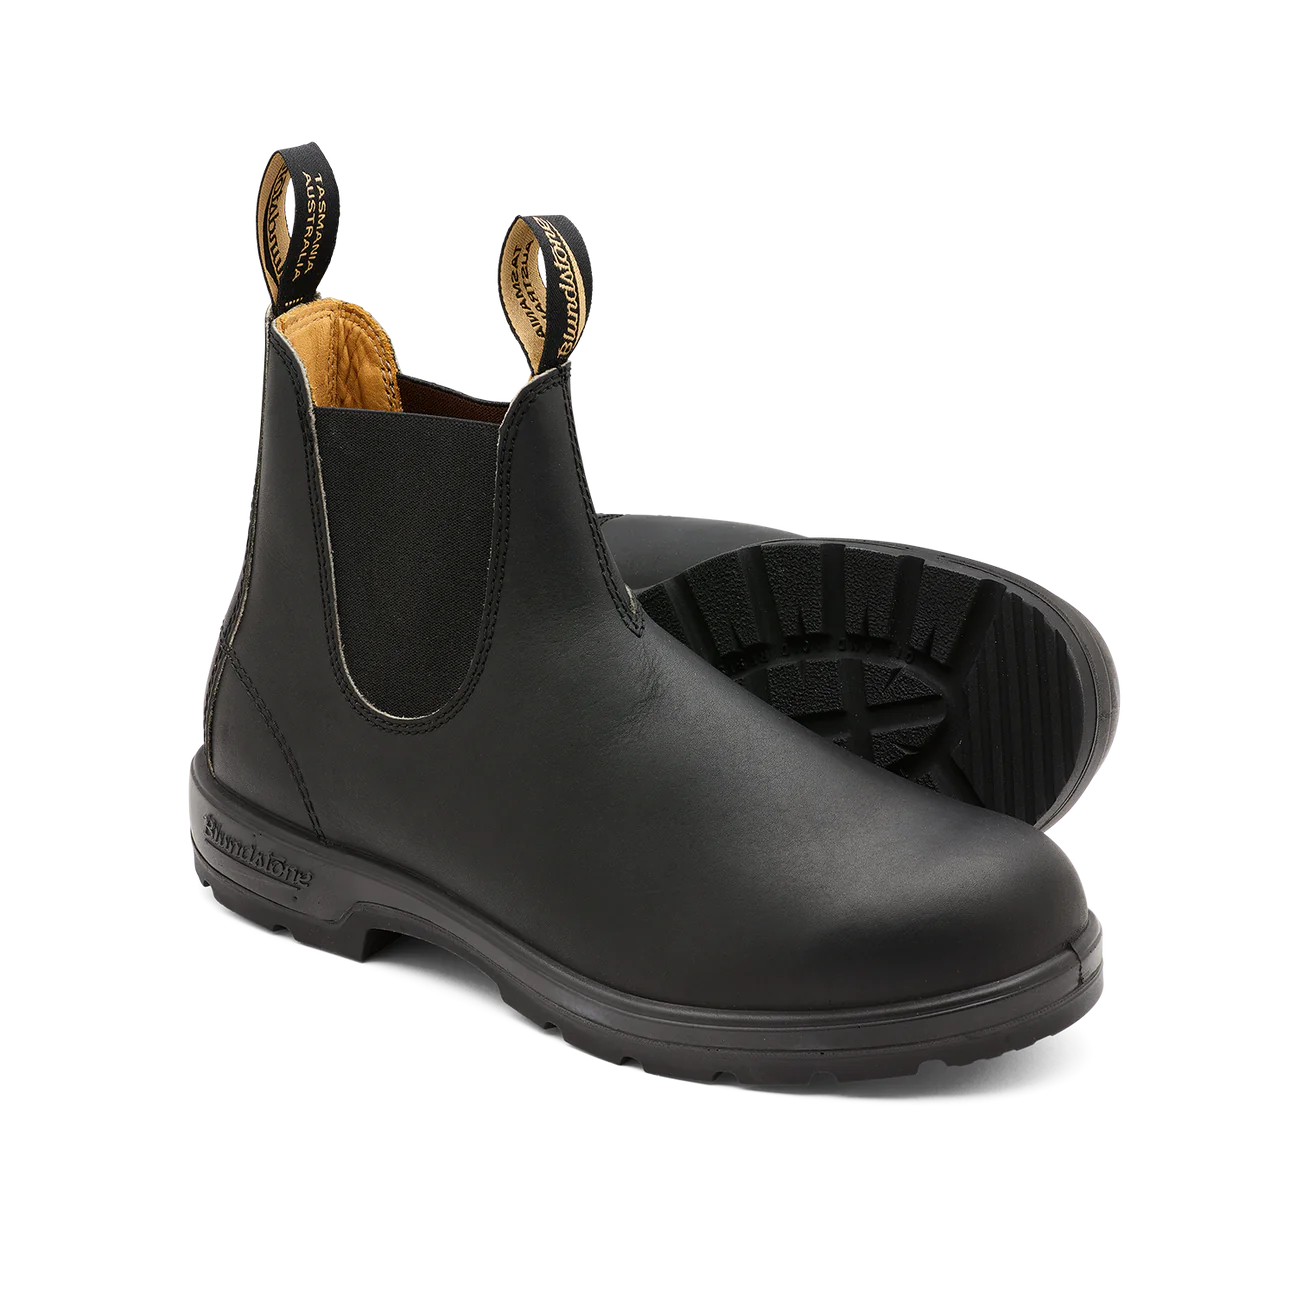 Blundstone 558 Classic Boots